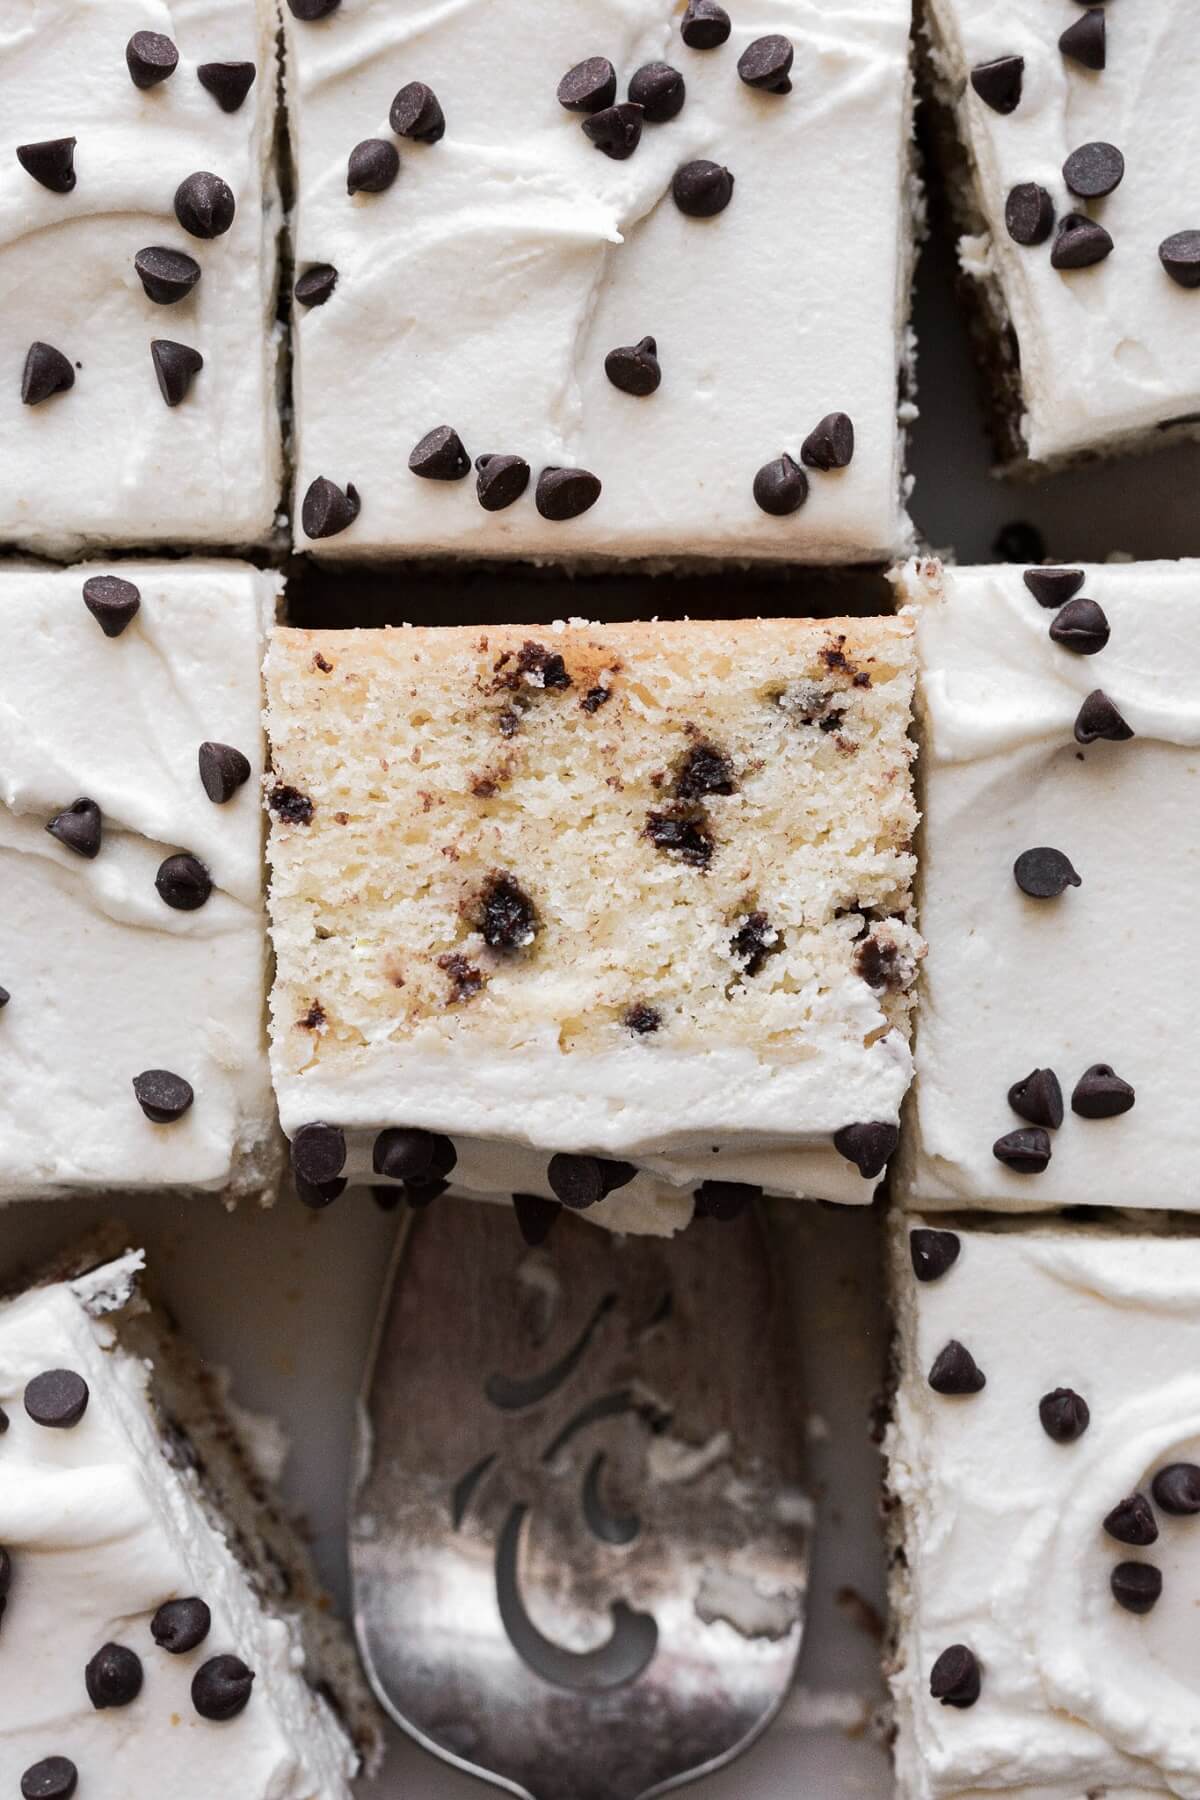 Chocolate chip cake, cut into squares.